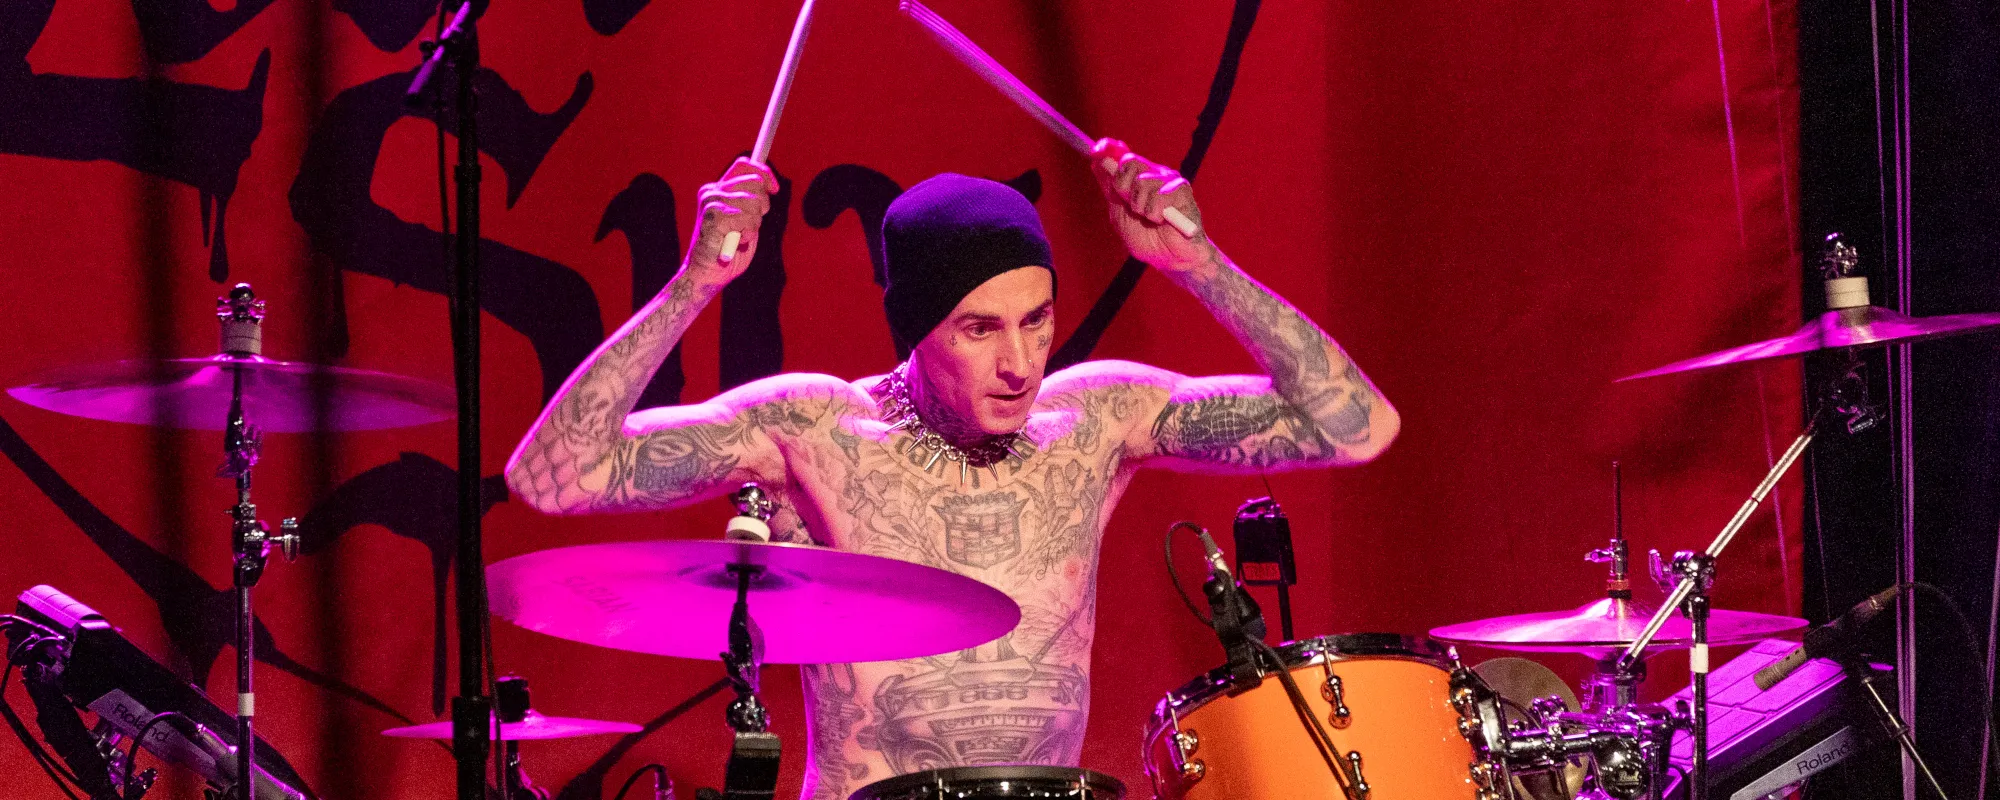 Travis Barker Set to Appear on New NFT Collection with LimeWire